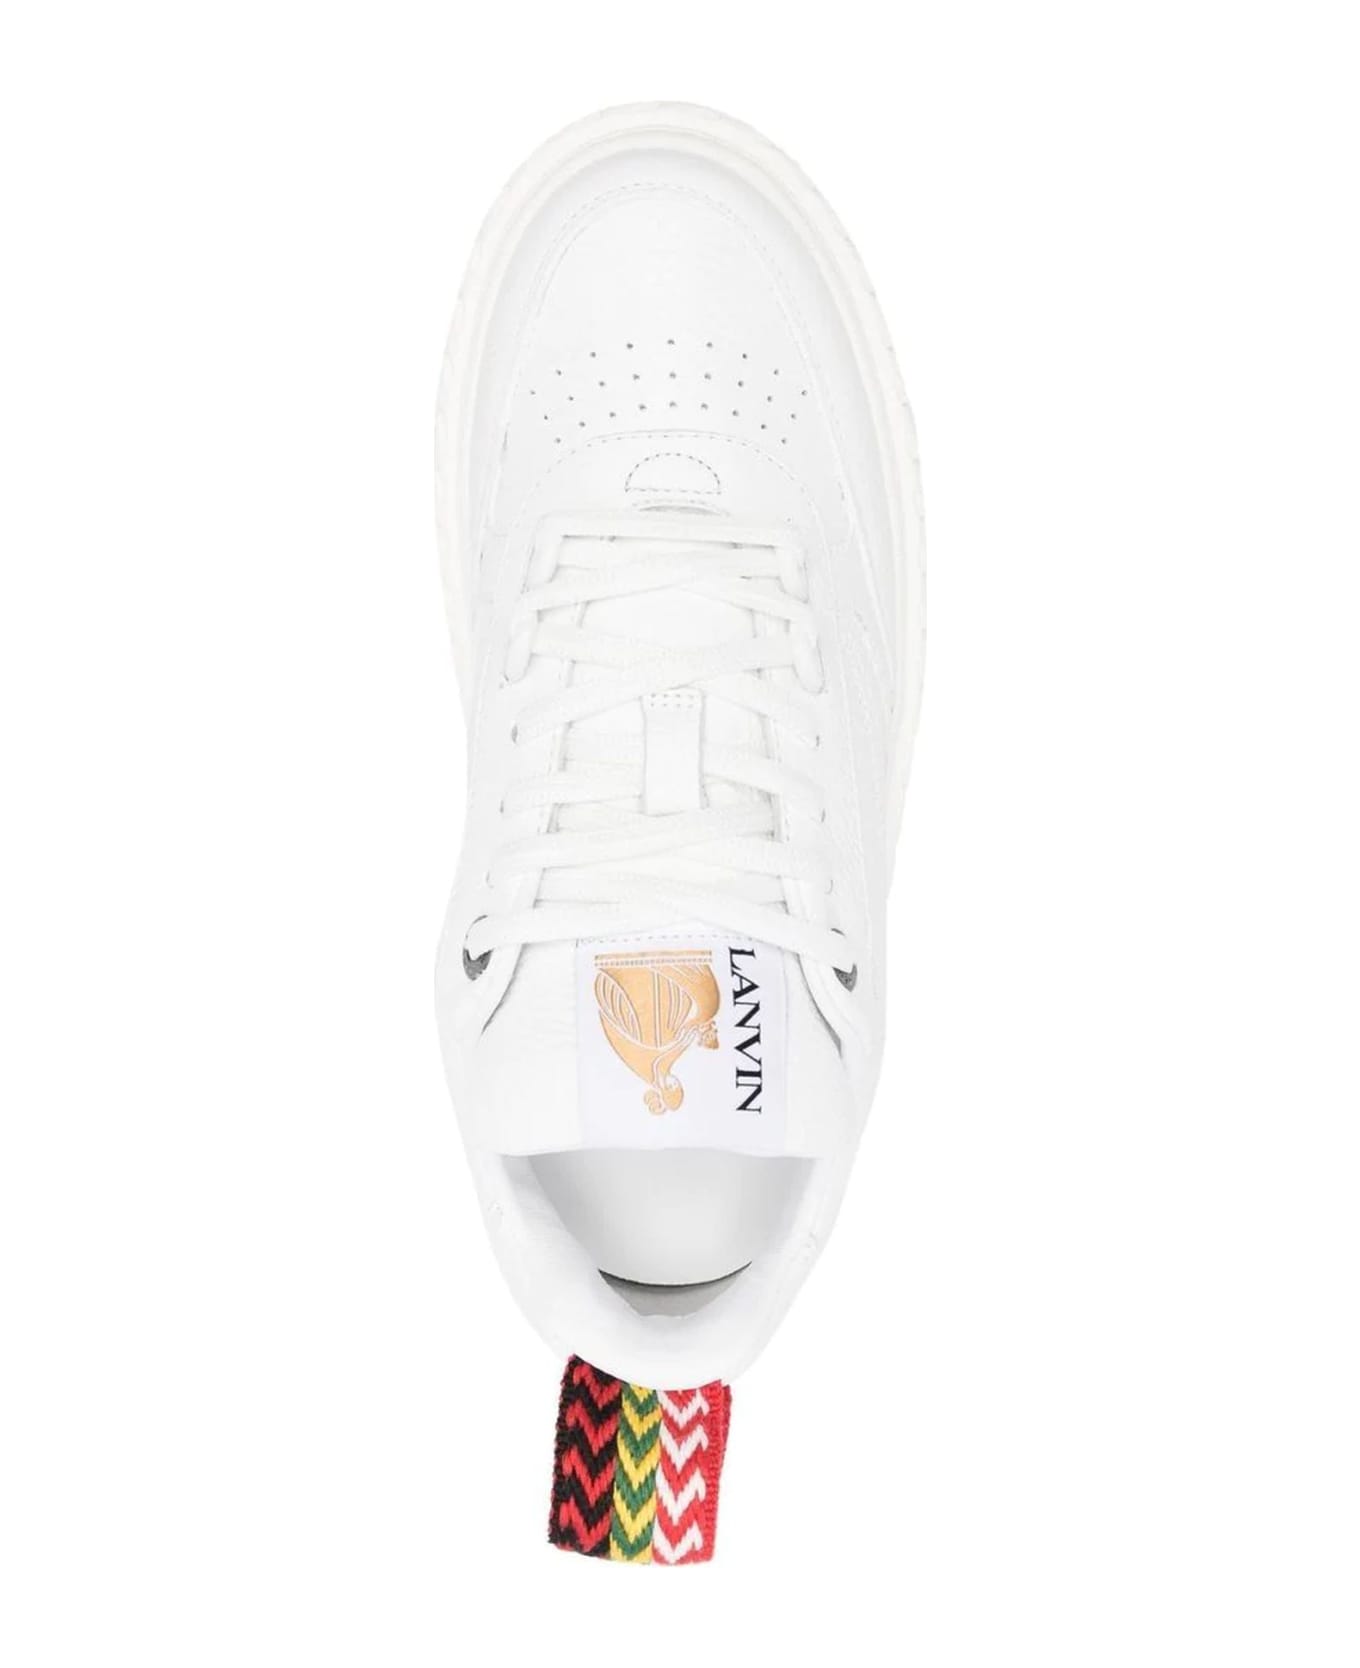 Lanvin White Curbies 2 Low-top Sneakers - White